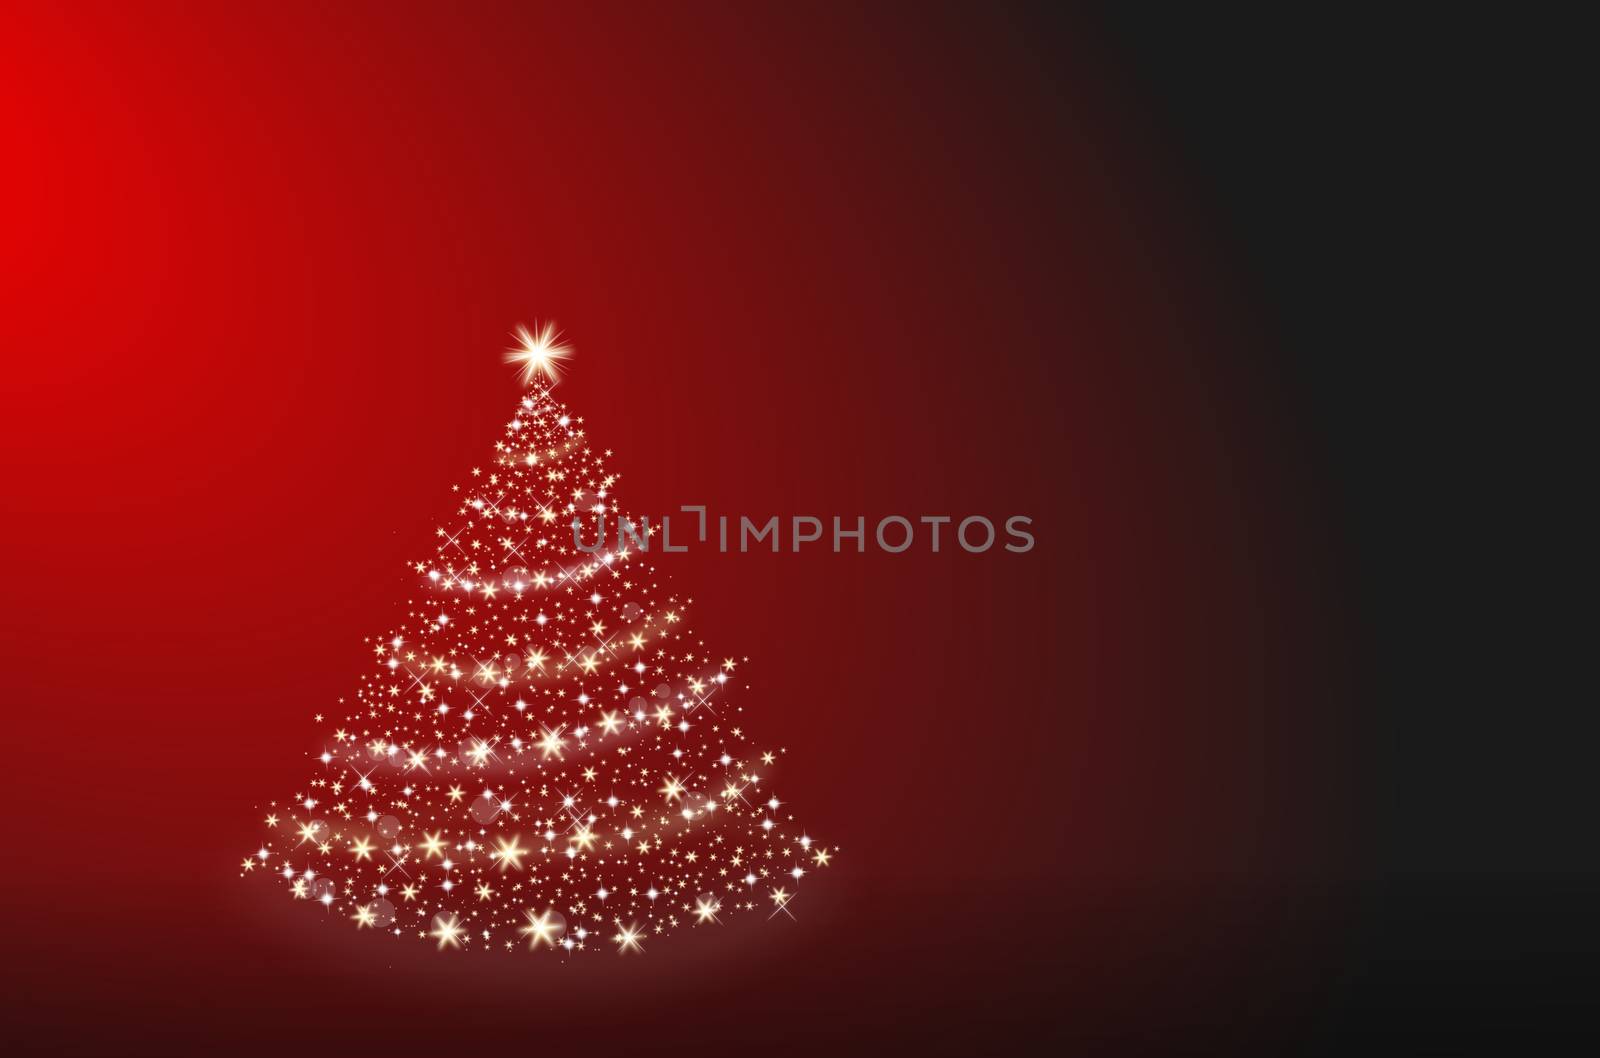 Christmas tree made of stars staying alone on a red background